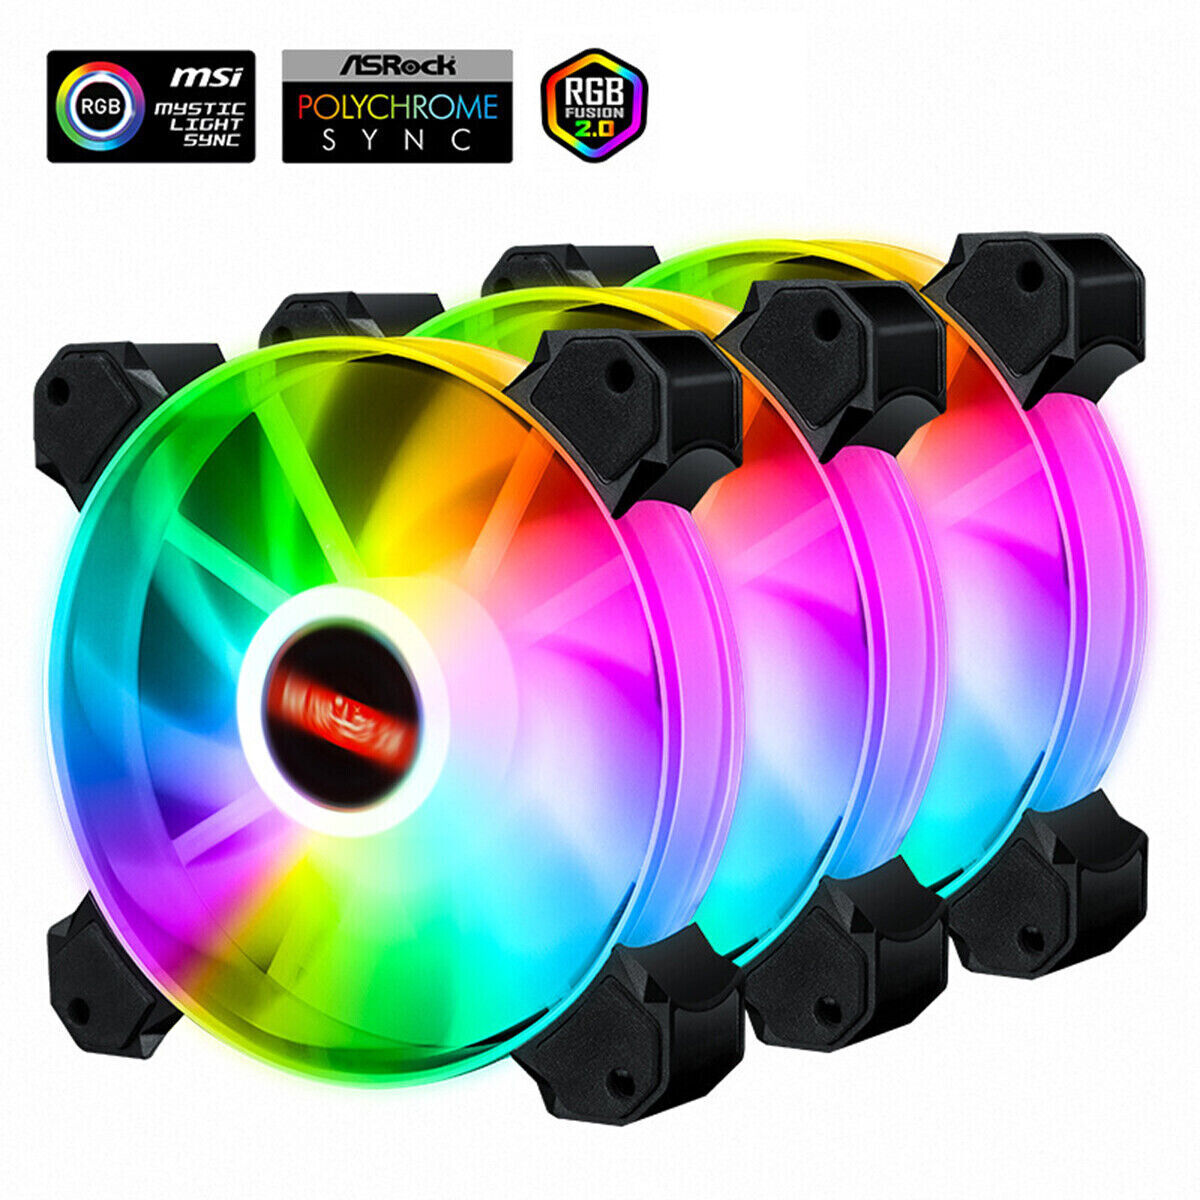 3Pack 120mm RGB Quiet Computer Case PC Cooling Fan RGB LED 3Pin/4Pin Game Cooler